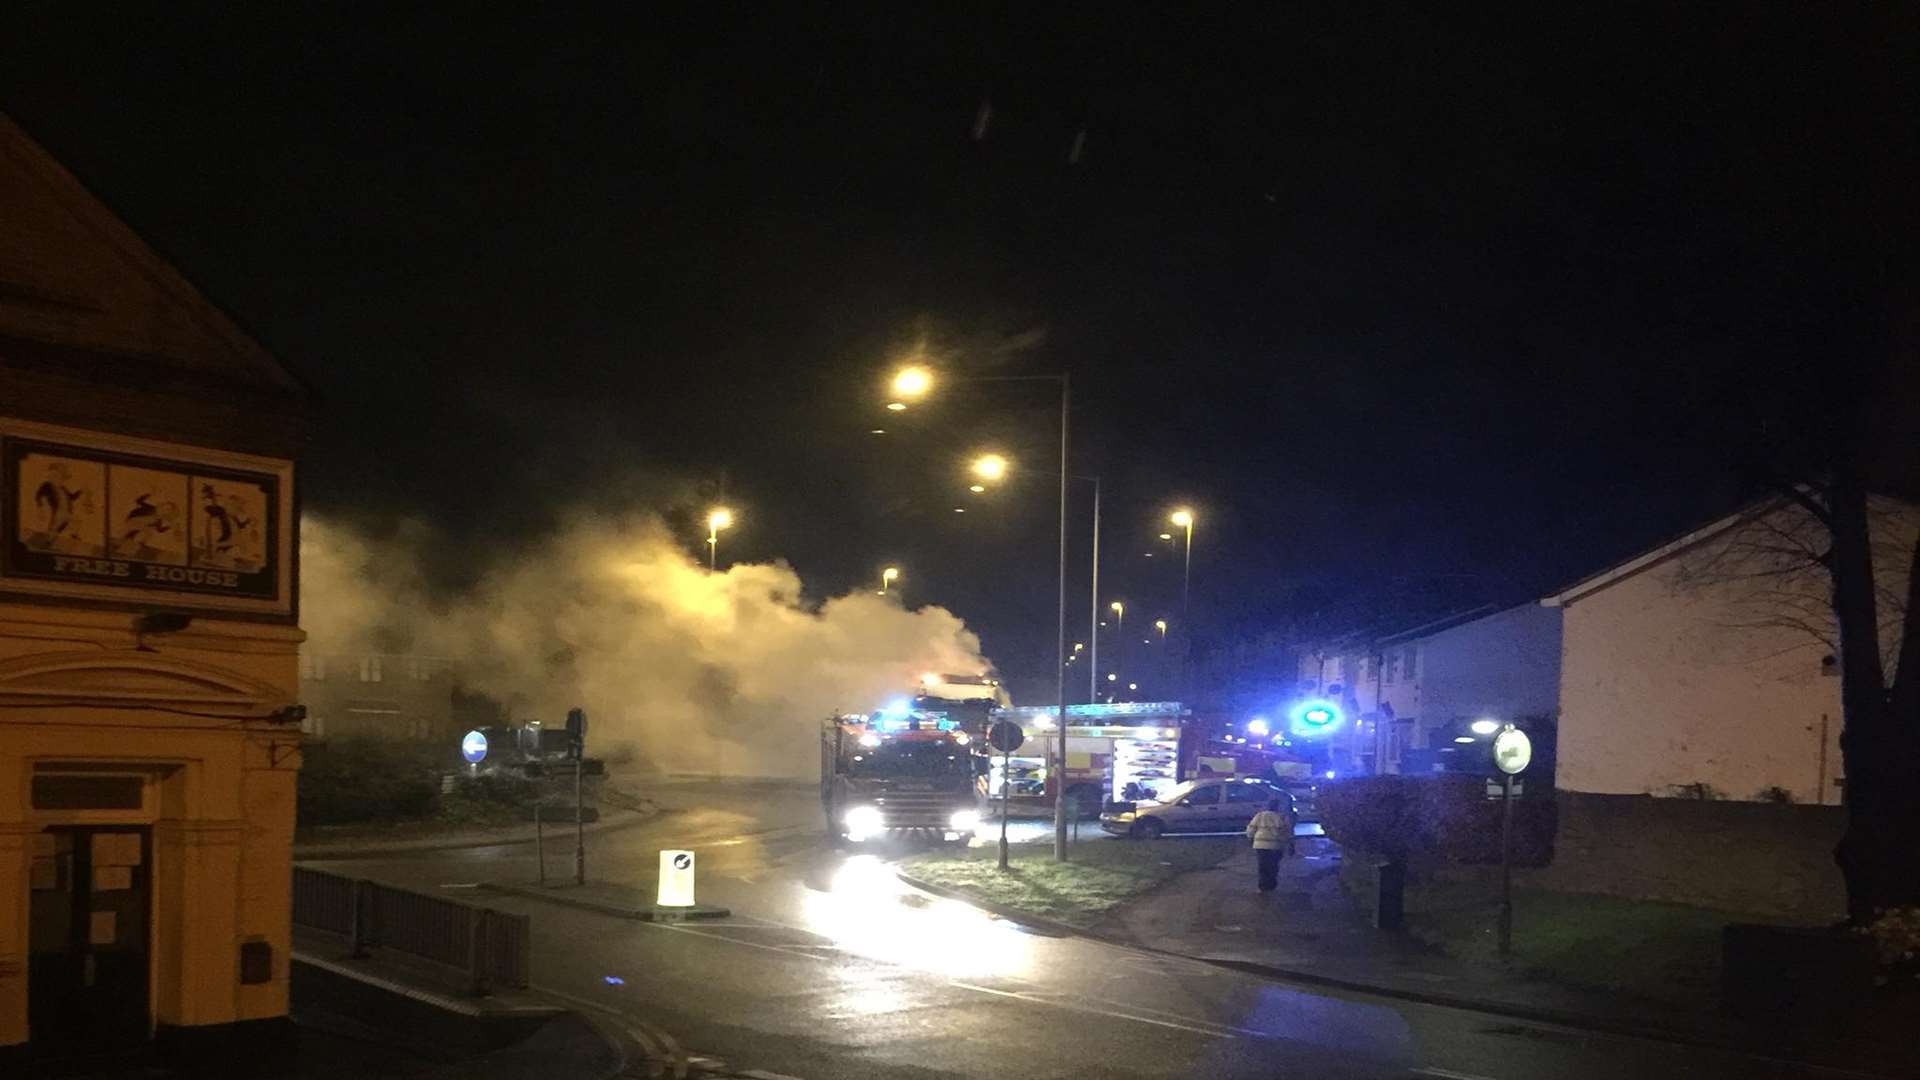 The lorry on fire at the roundabout on Staplehurst Road. Picture: Ricky Gray